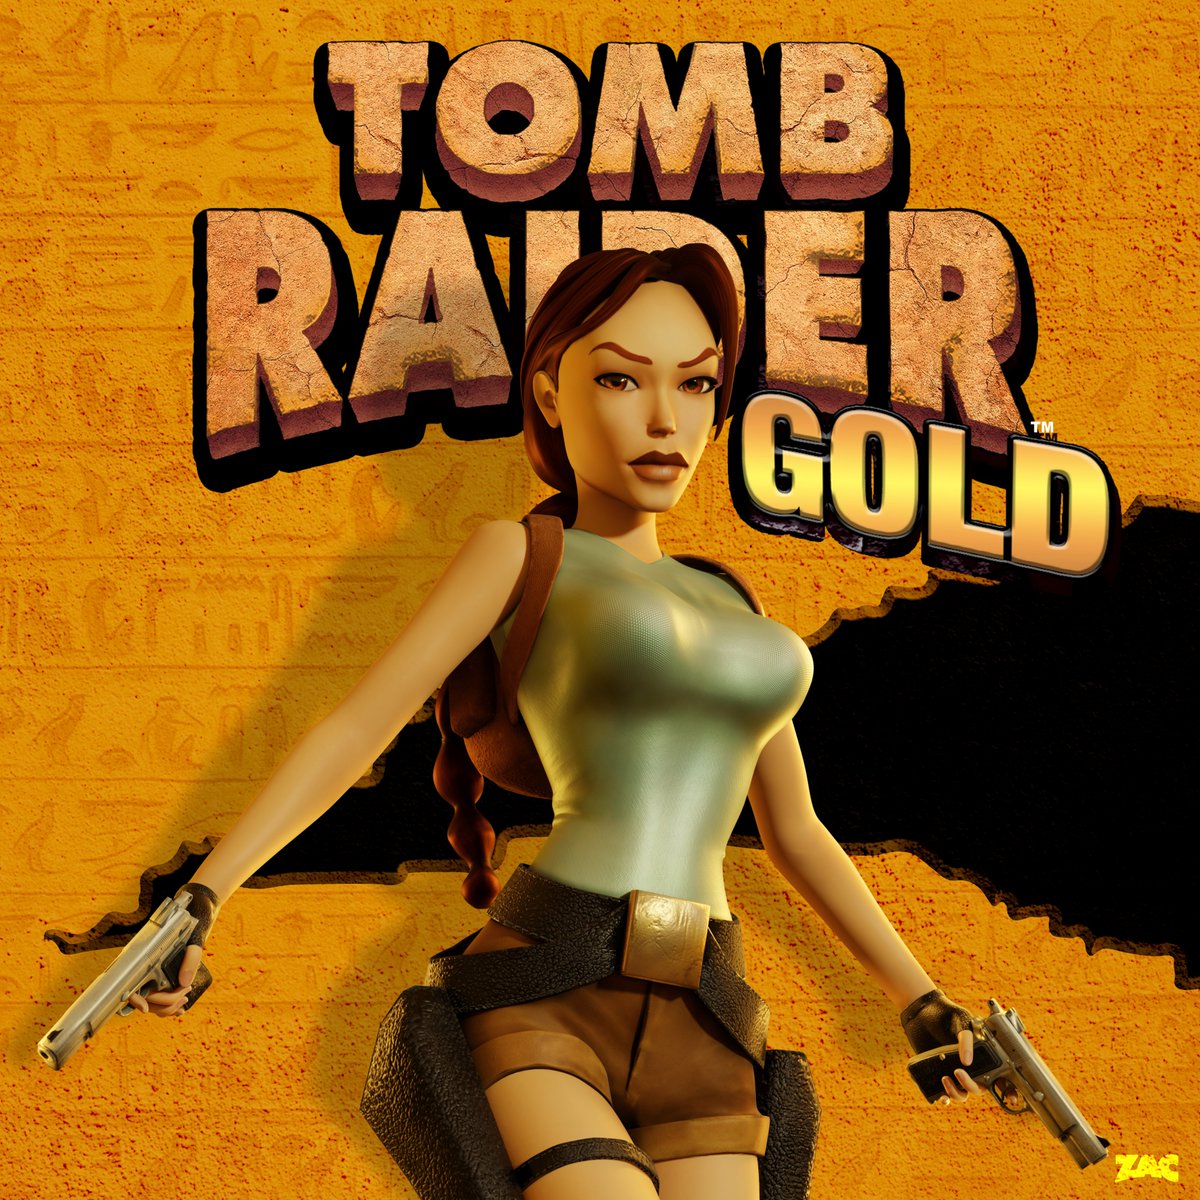 Continuing with my recreation pack, here it goes! — My version of the 'Tomb Raider Gold' cover! ✨ A huge thanks to @nicolebounxe for making me this render!